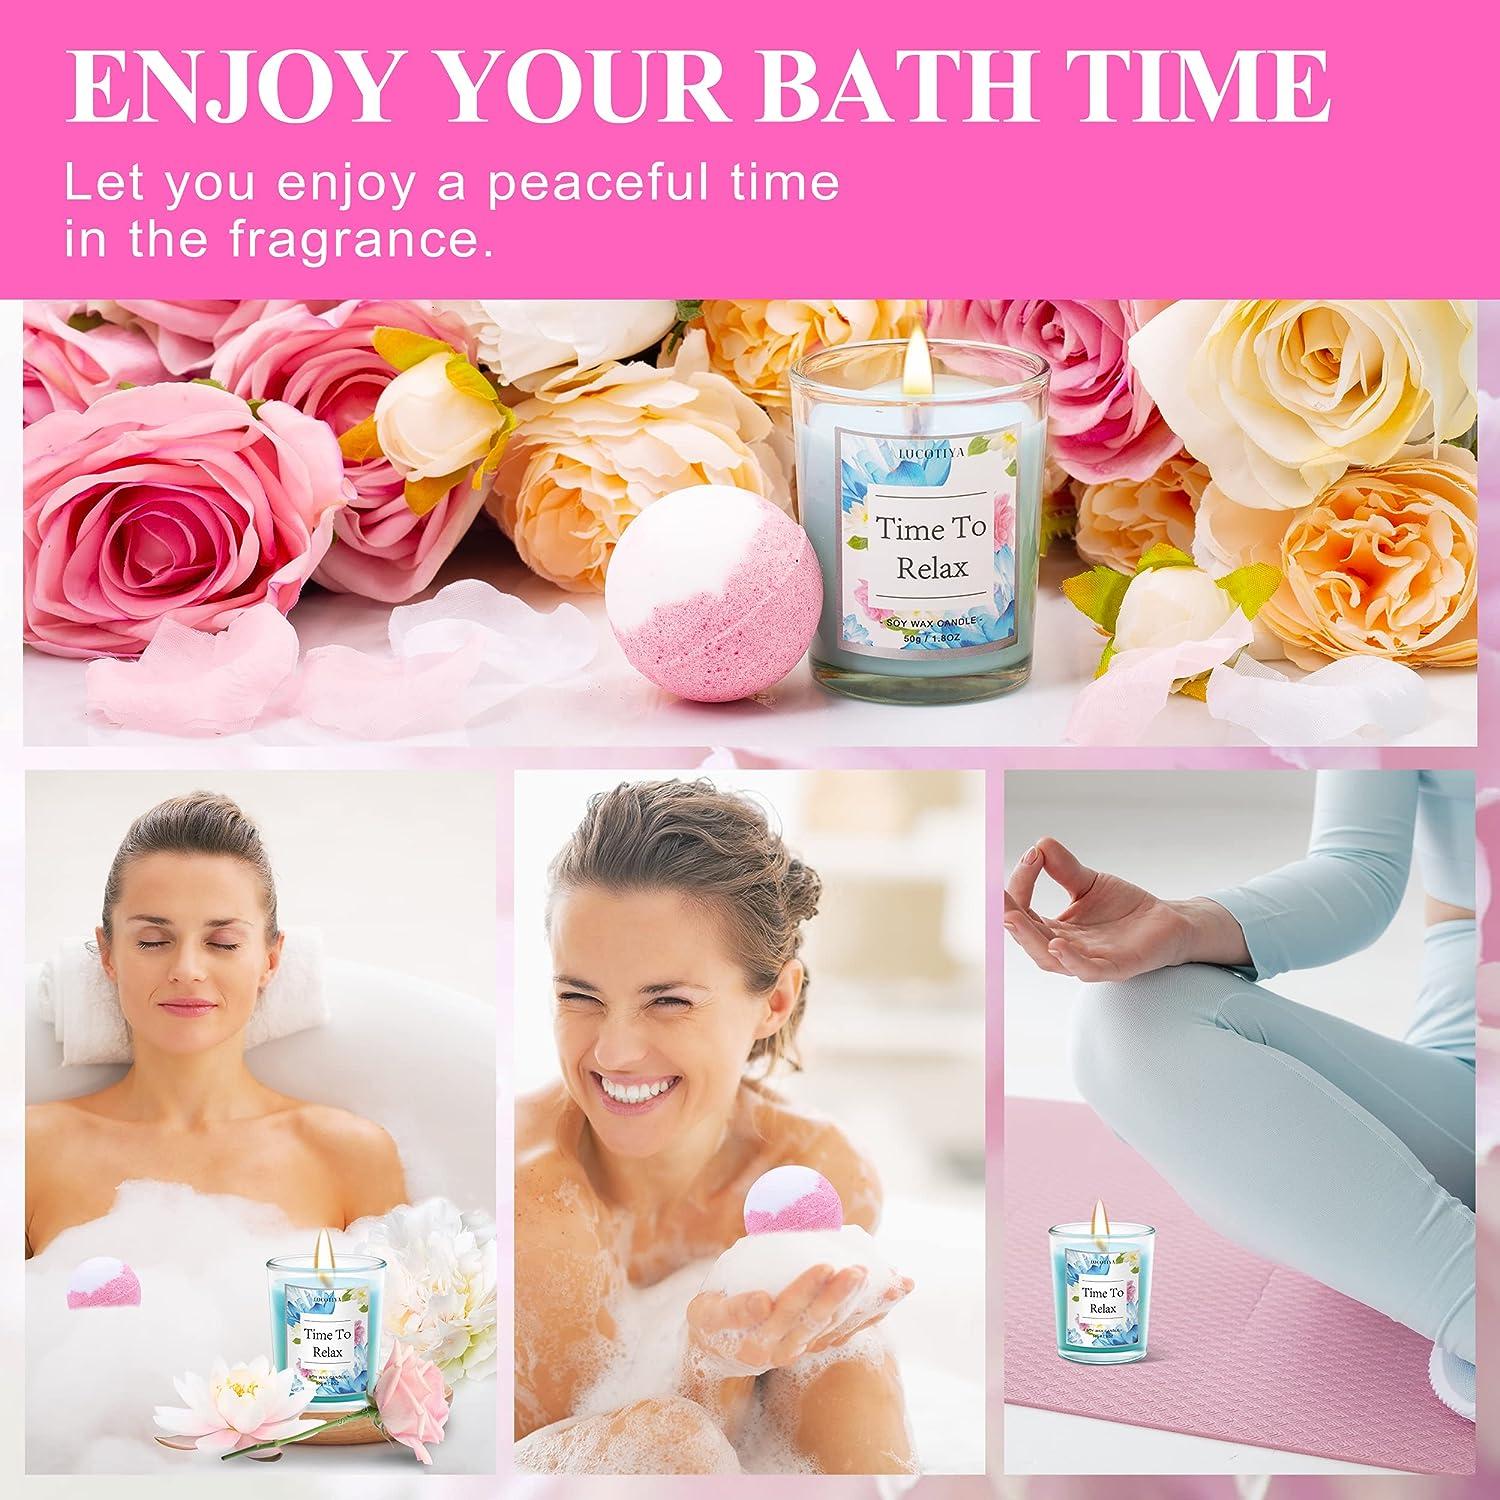 Birthday Gifts for Women Bath and Body Works Gifts Set for Women Spa Gifts  Baskets for Women Bubble Bath for Women Lotus Rose Gifts for